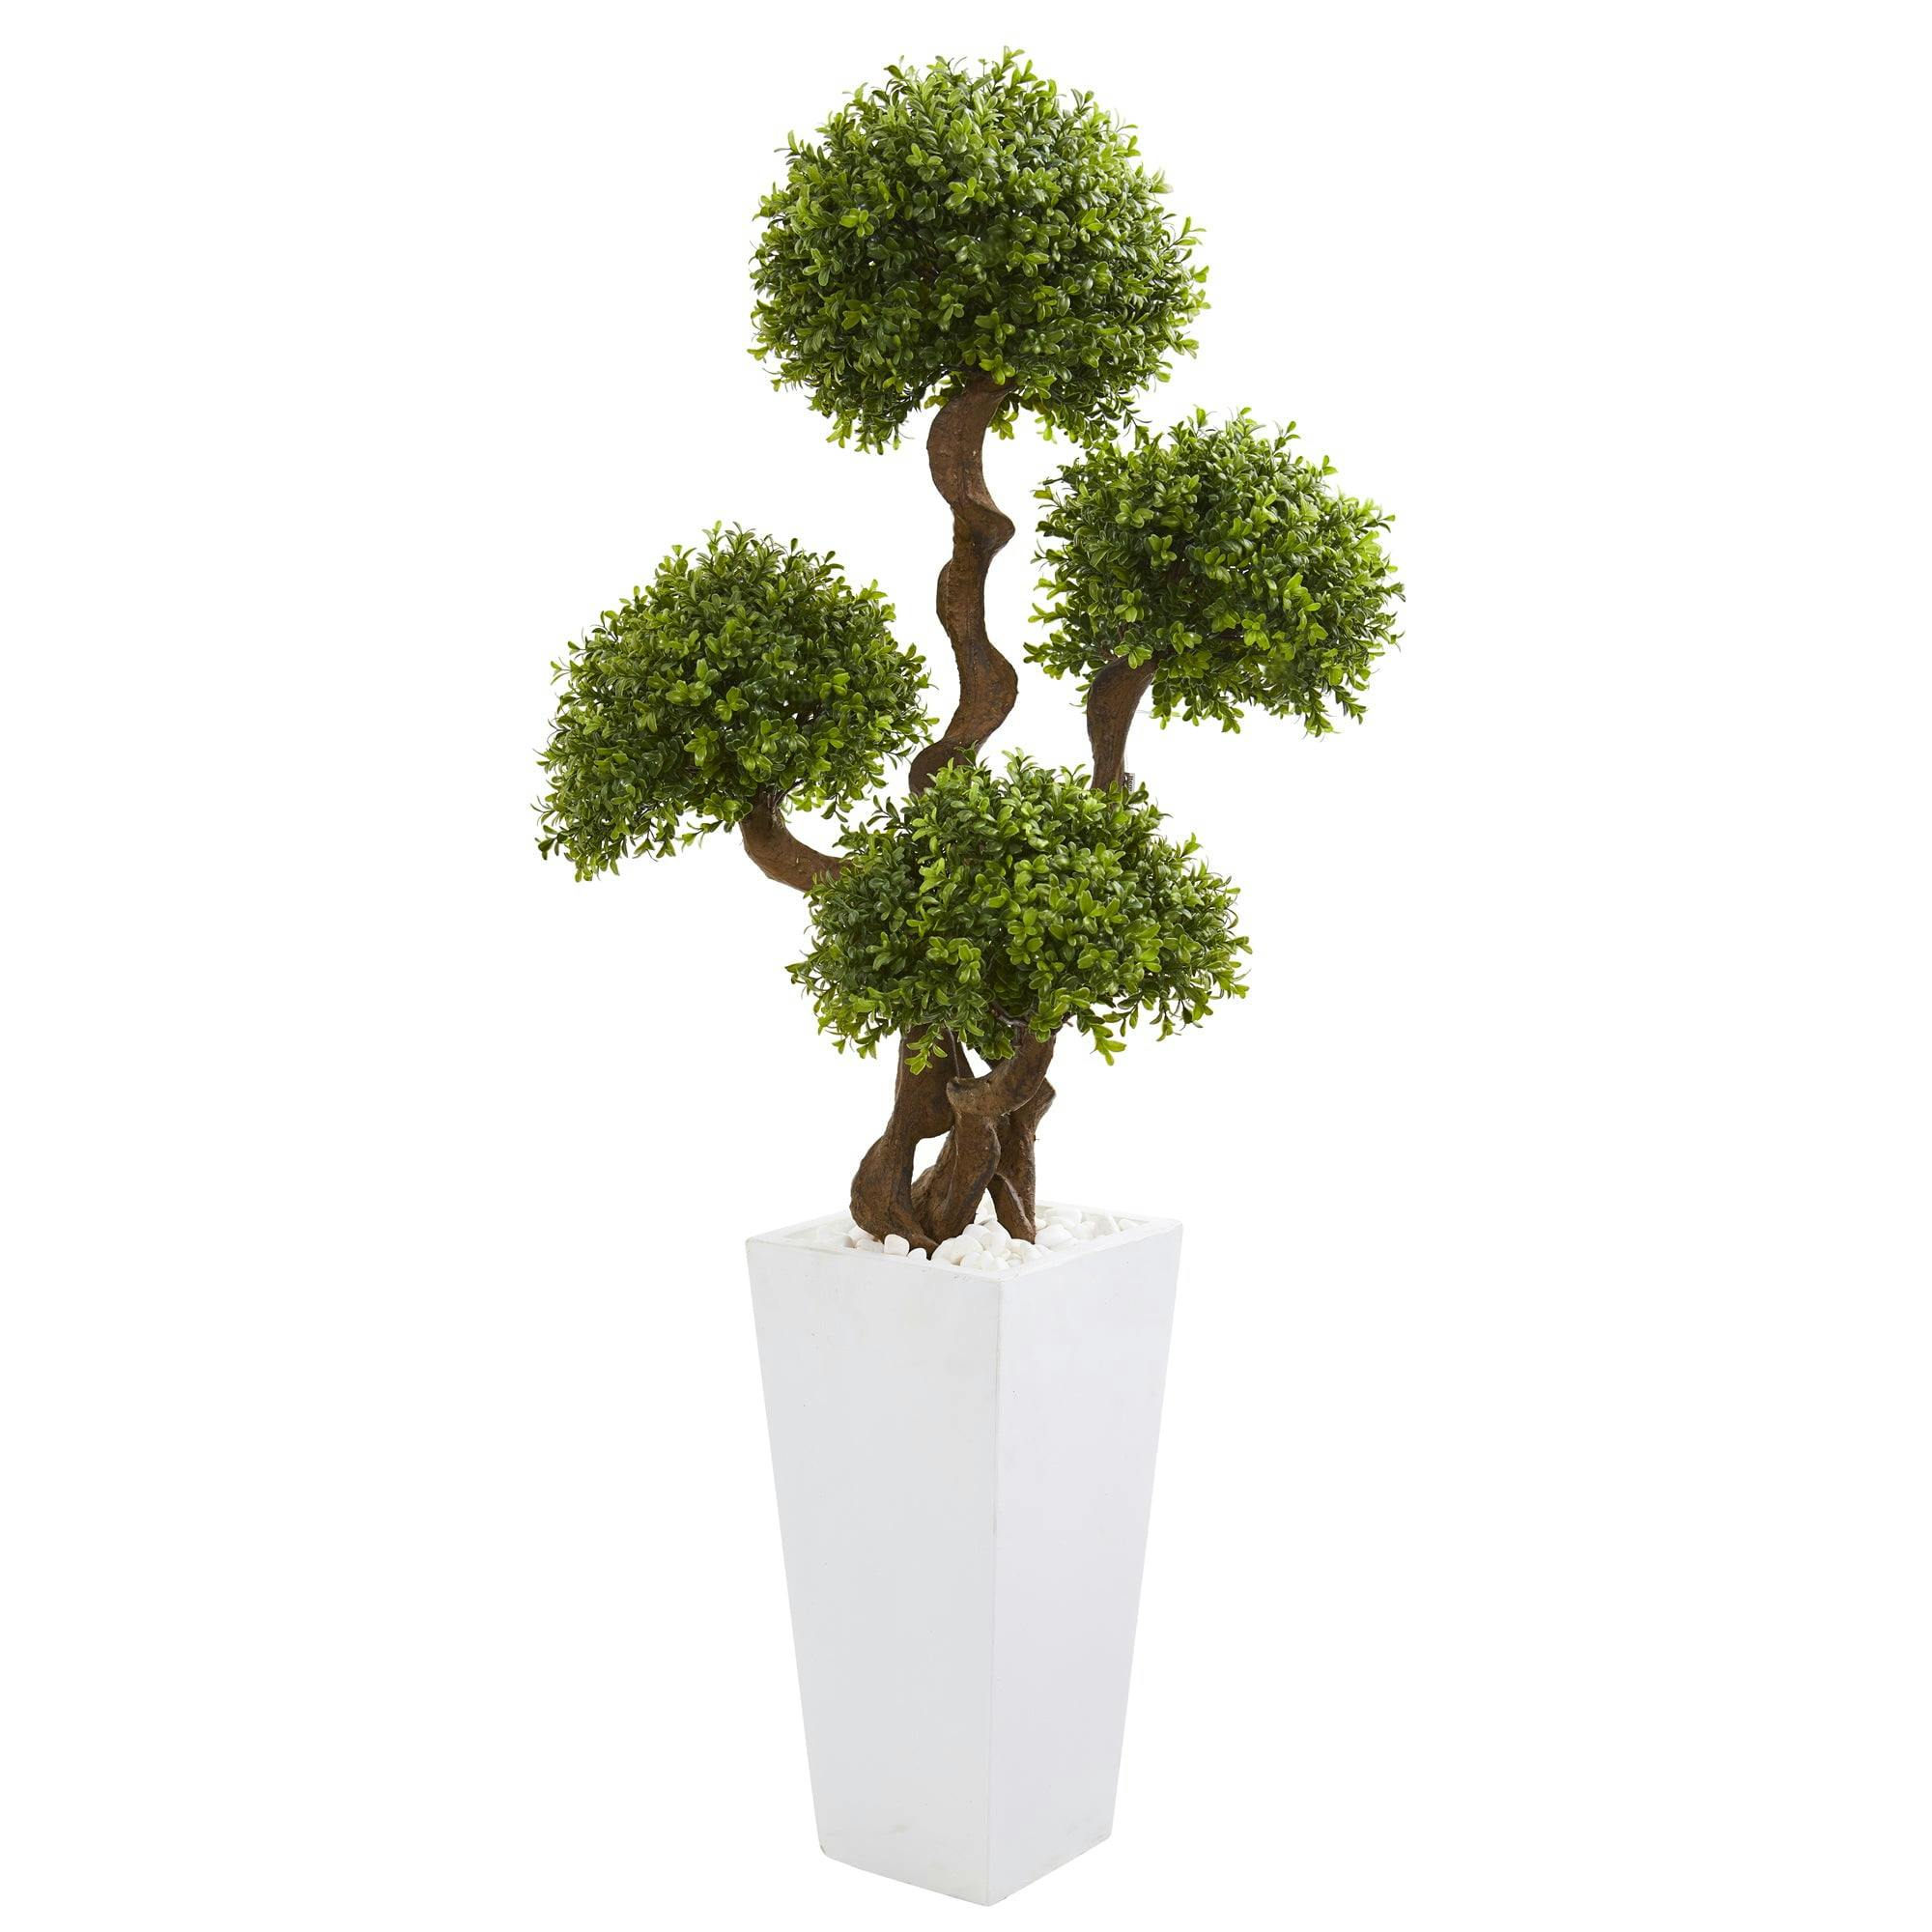 Bright Green 58" Boxwood Four-Ball Topiary in White Planter